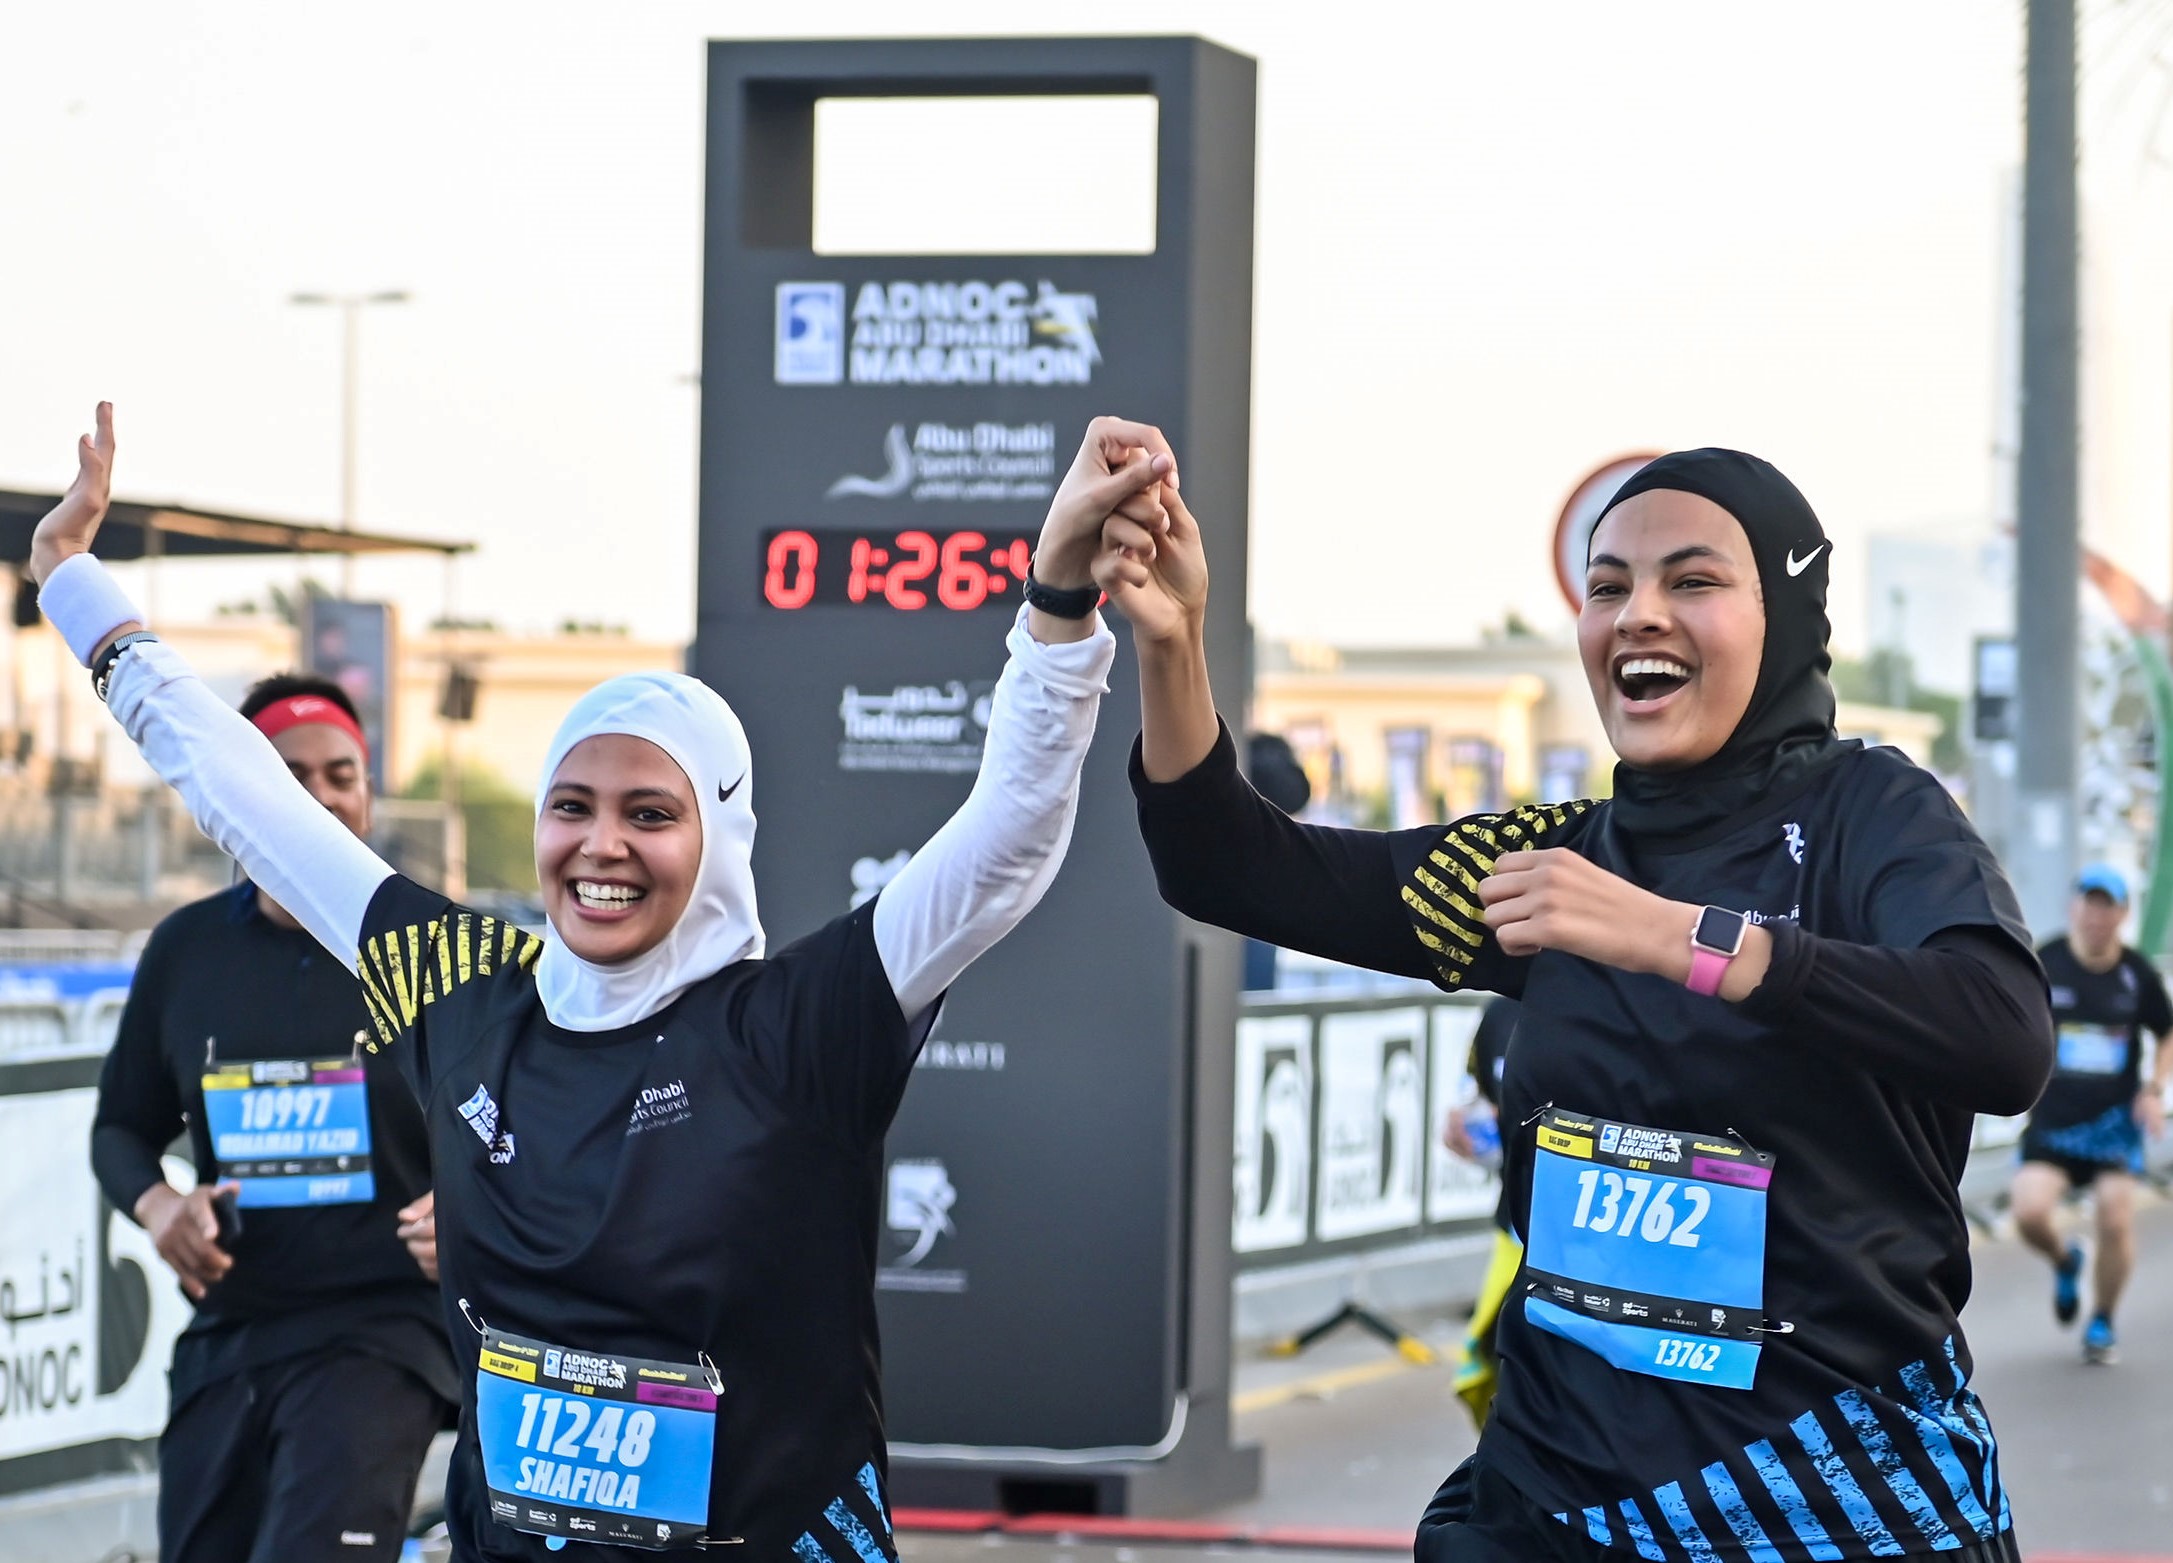 Nike Announced As The Official Technical Sponsor For The Upcoming 2021 ADNOC Abu Dhabi Marathon